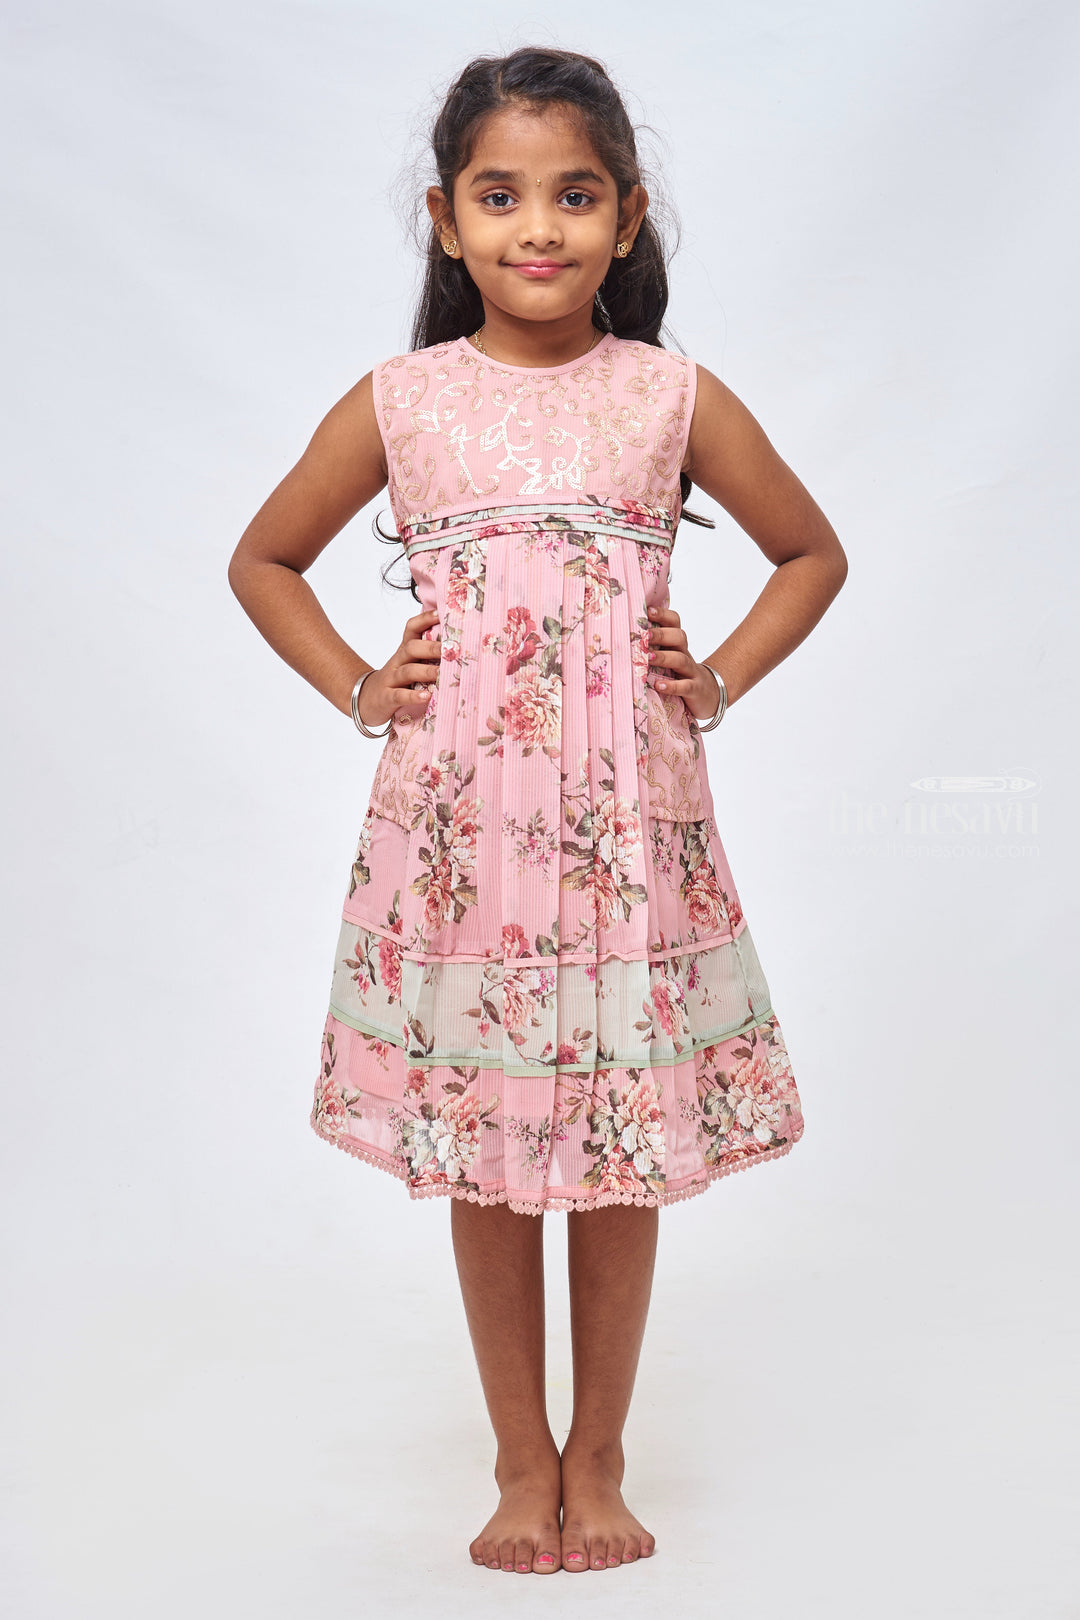 The Nesavu Girls Cotton Frock Pretty in Pink: Sequin Embroidered Floral Printed Pink Cotton Frock for Girls Nesavu 22 (4Y) / Pink / Georgette GFC1157B-22 Cotton Frocks in Diverse Designs for Girls | Comfortable Cotton Frocks for Girls | The Nesavu